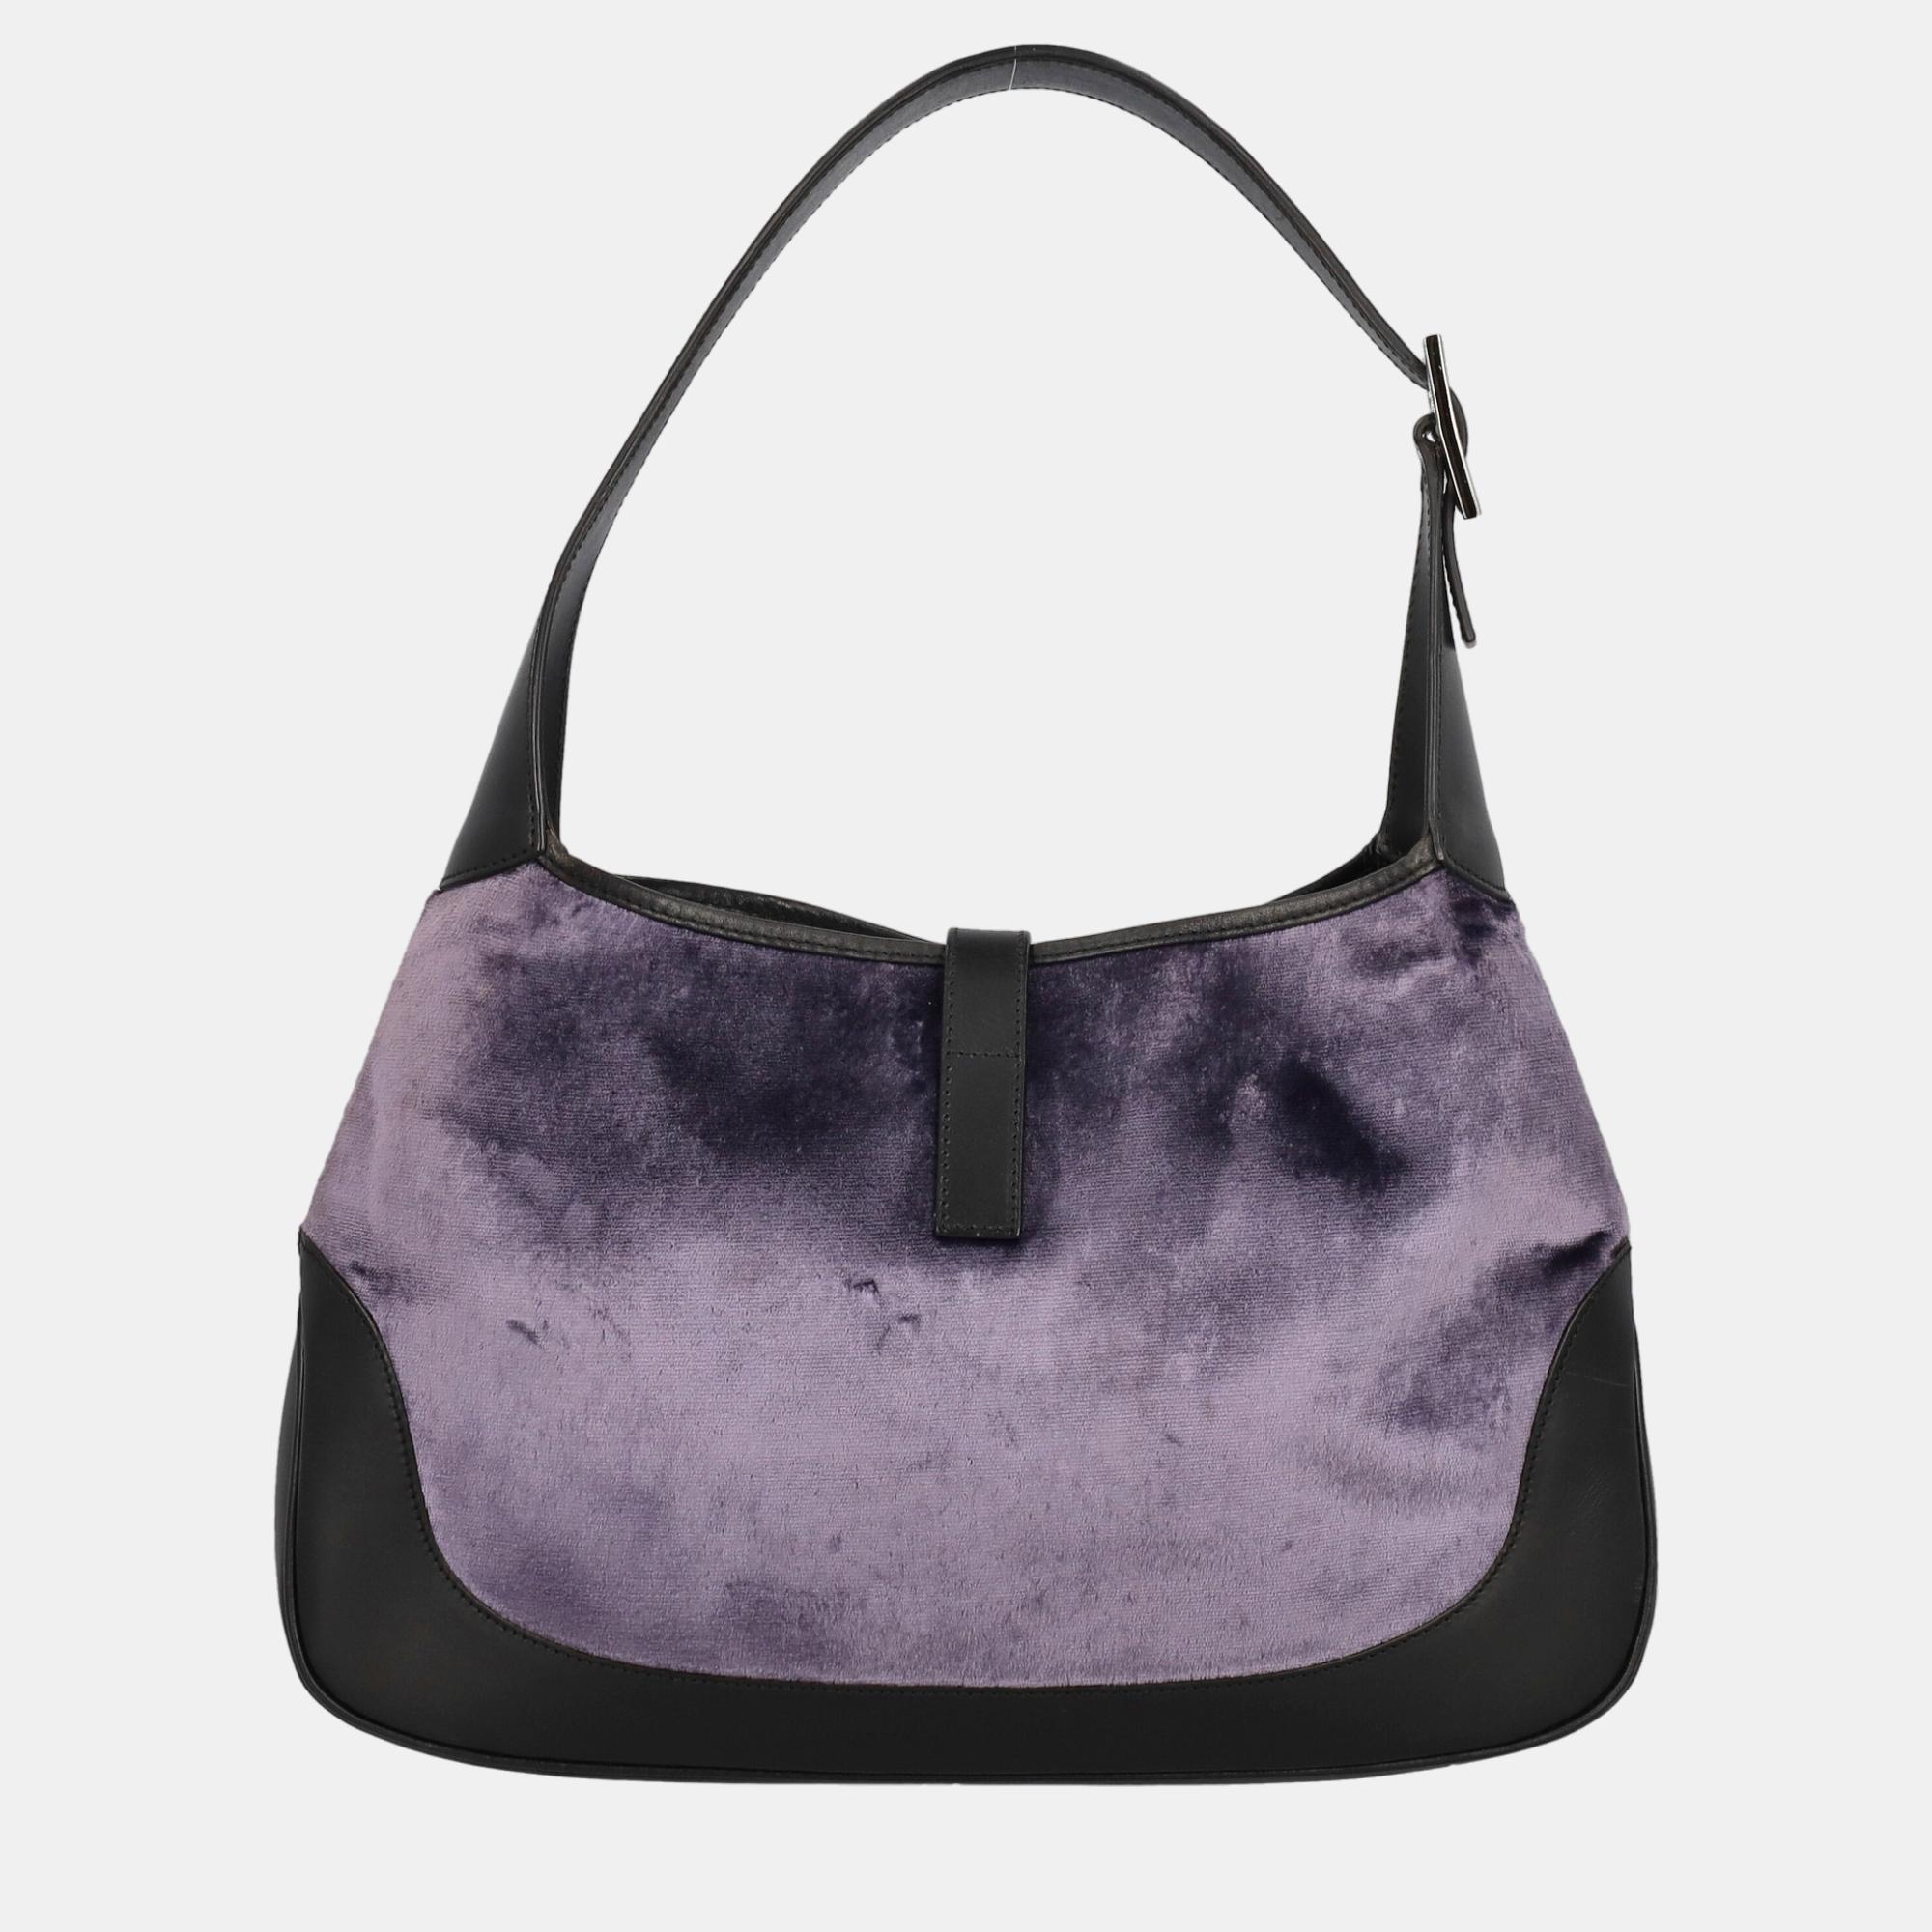 Gucci Jackie -  Women's Leather Hobo Bag - Purple - One Size